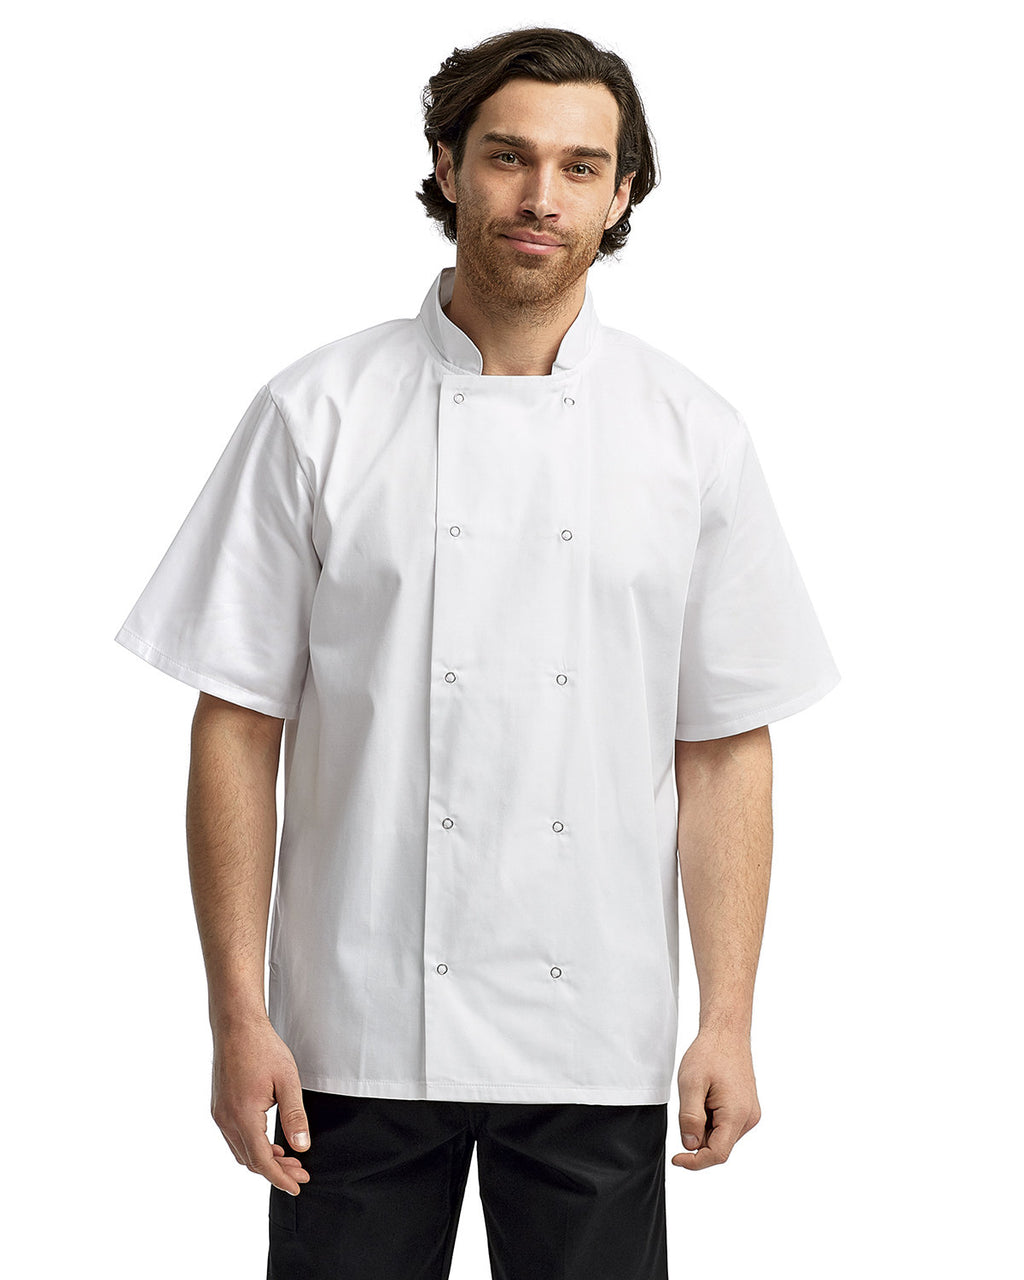 RP664-Artisan Collection by Reprime Unisex Studded Front Short-Sleeve Chef's Jacket